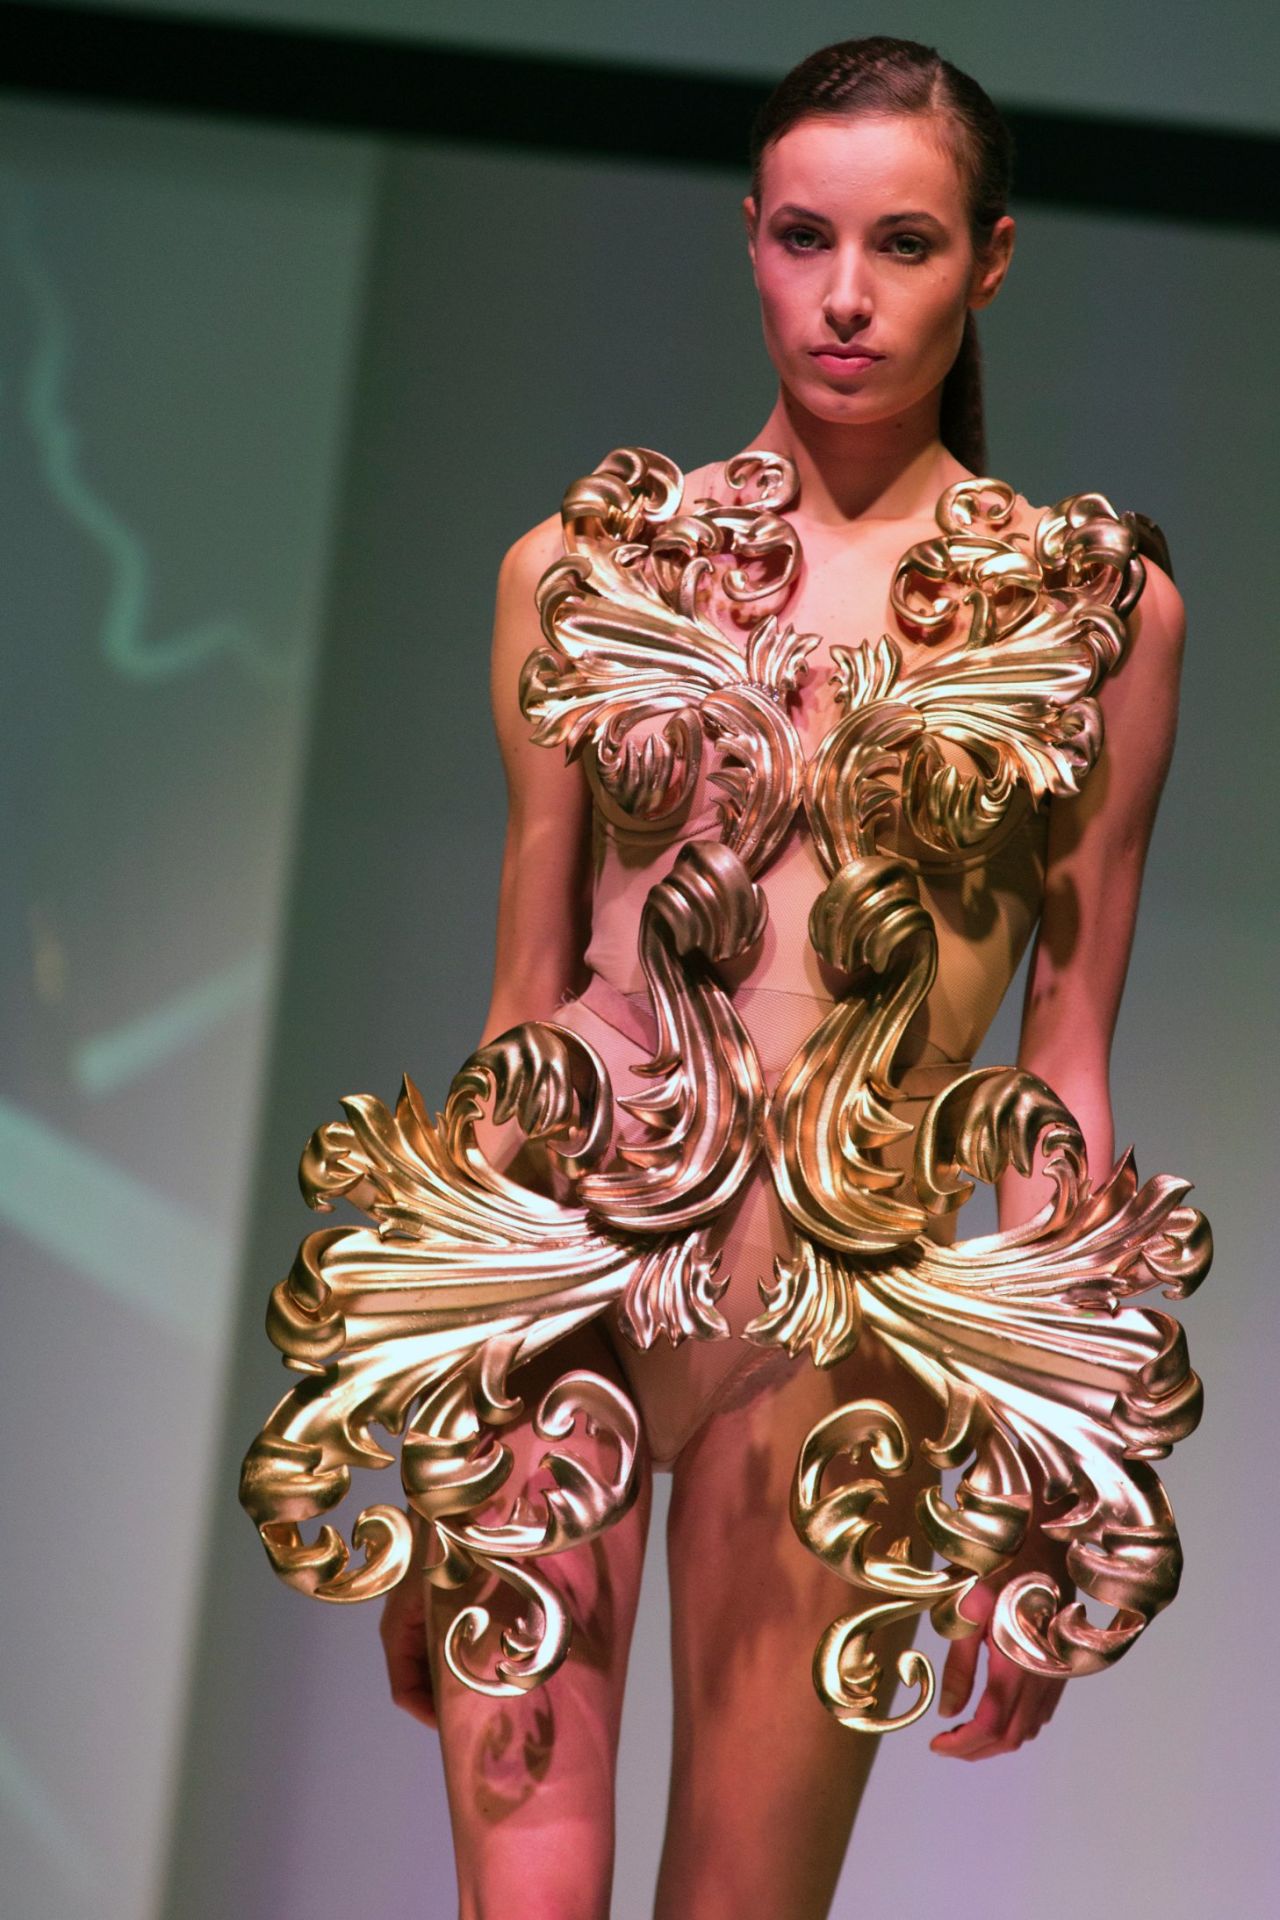 3-D printed dresses can be beautiful, but often seem impractical. For instance, this <a href="http://hinzepia.wix.com/muted" target="_blank" target="_blank">Pia Hinze</a> dress resembles a haute couture shield rather than something a woman would actually wear on a night out. 